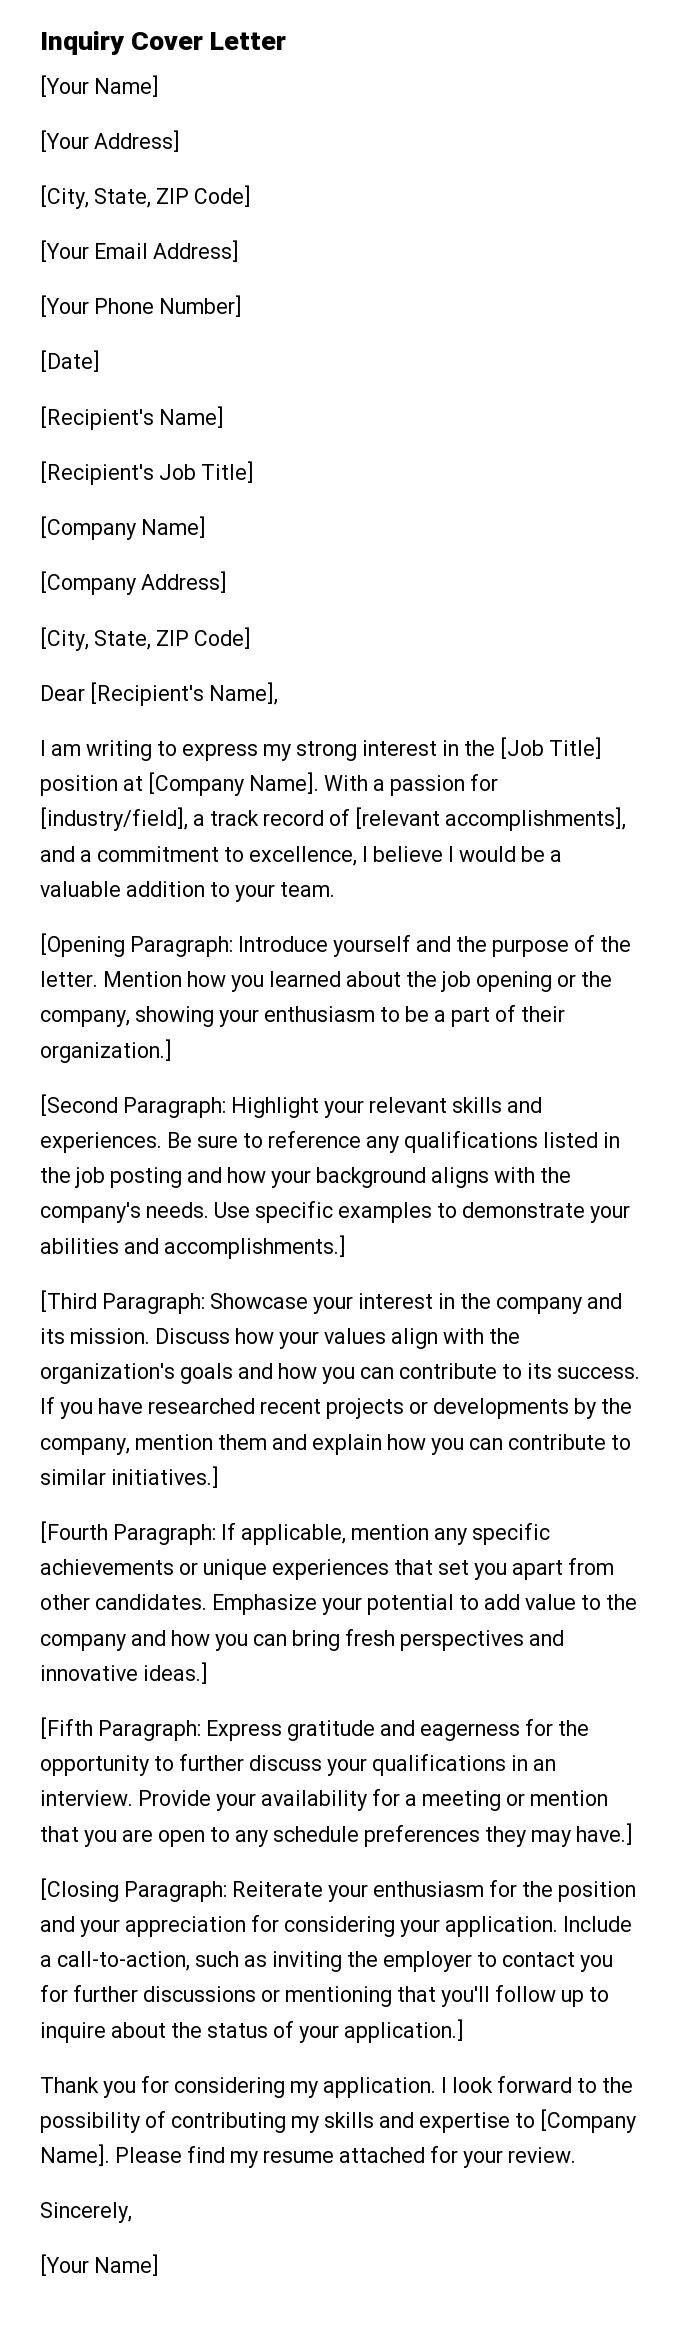 Inquiry Cover Letter